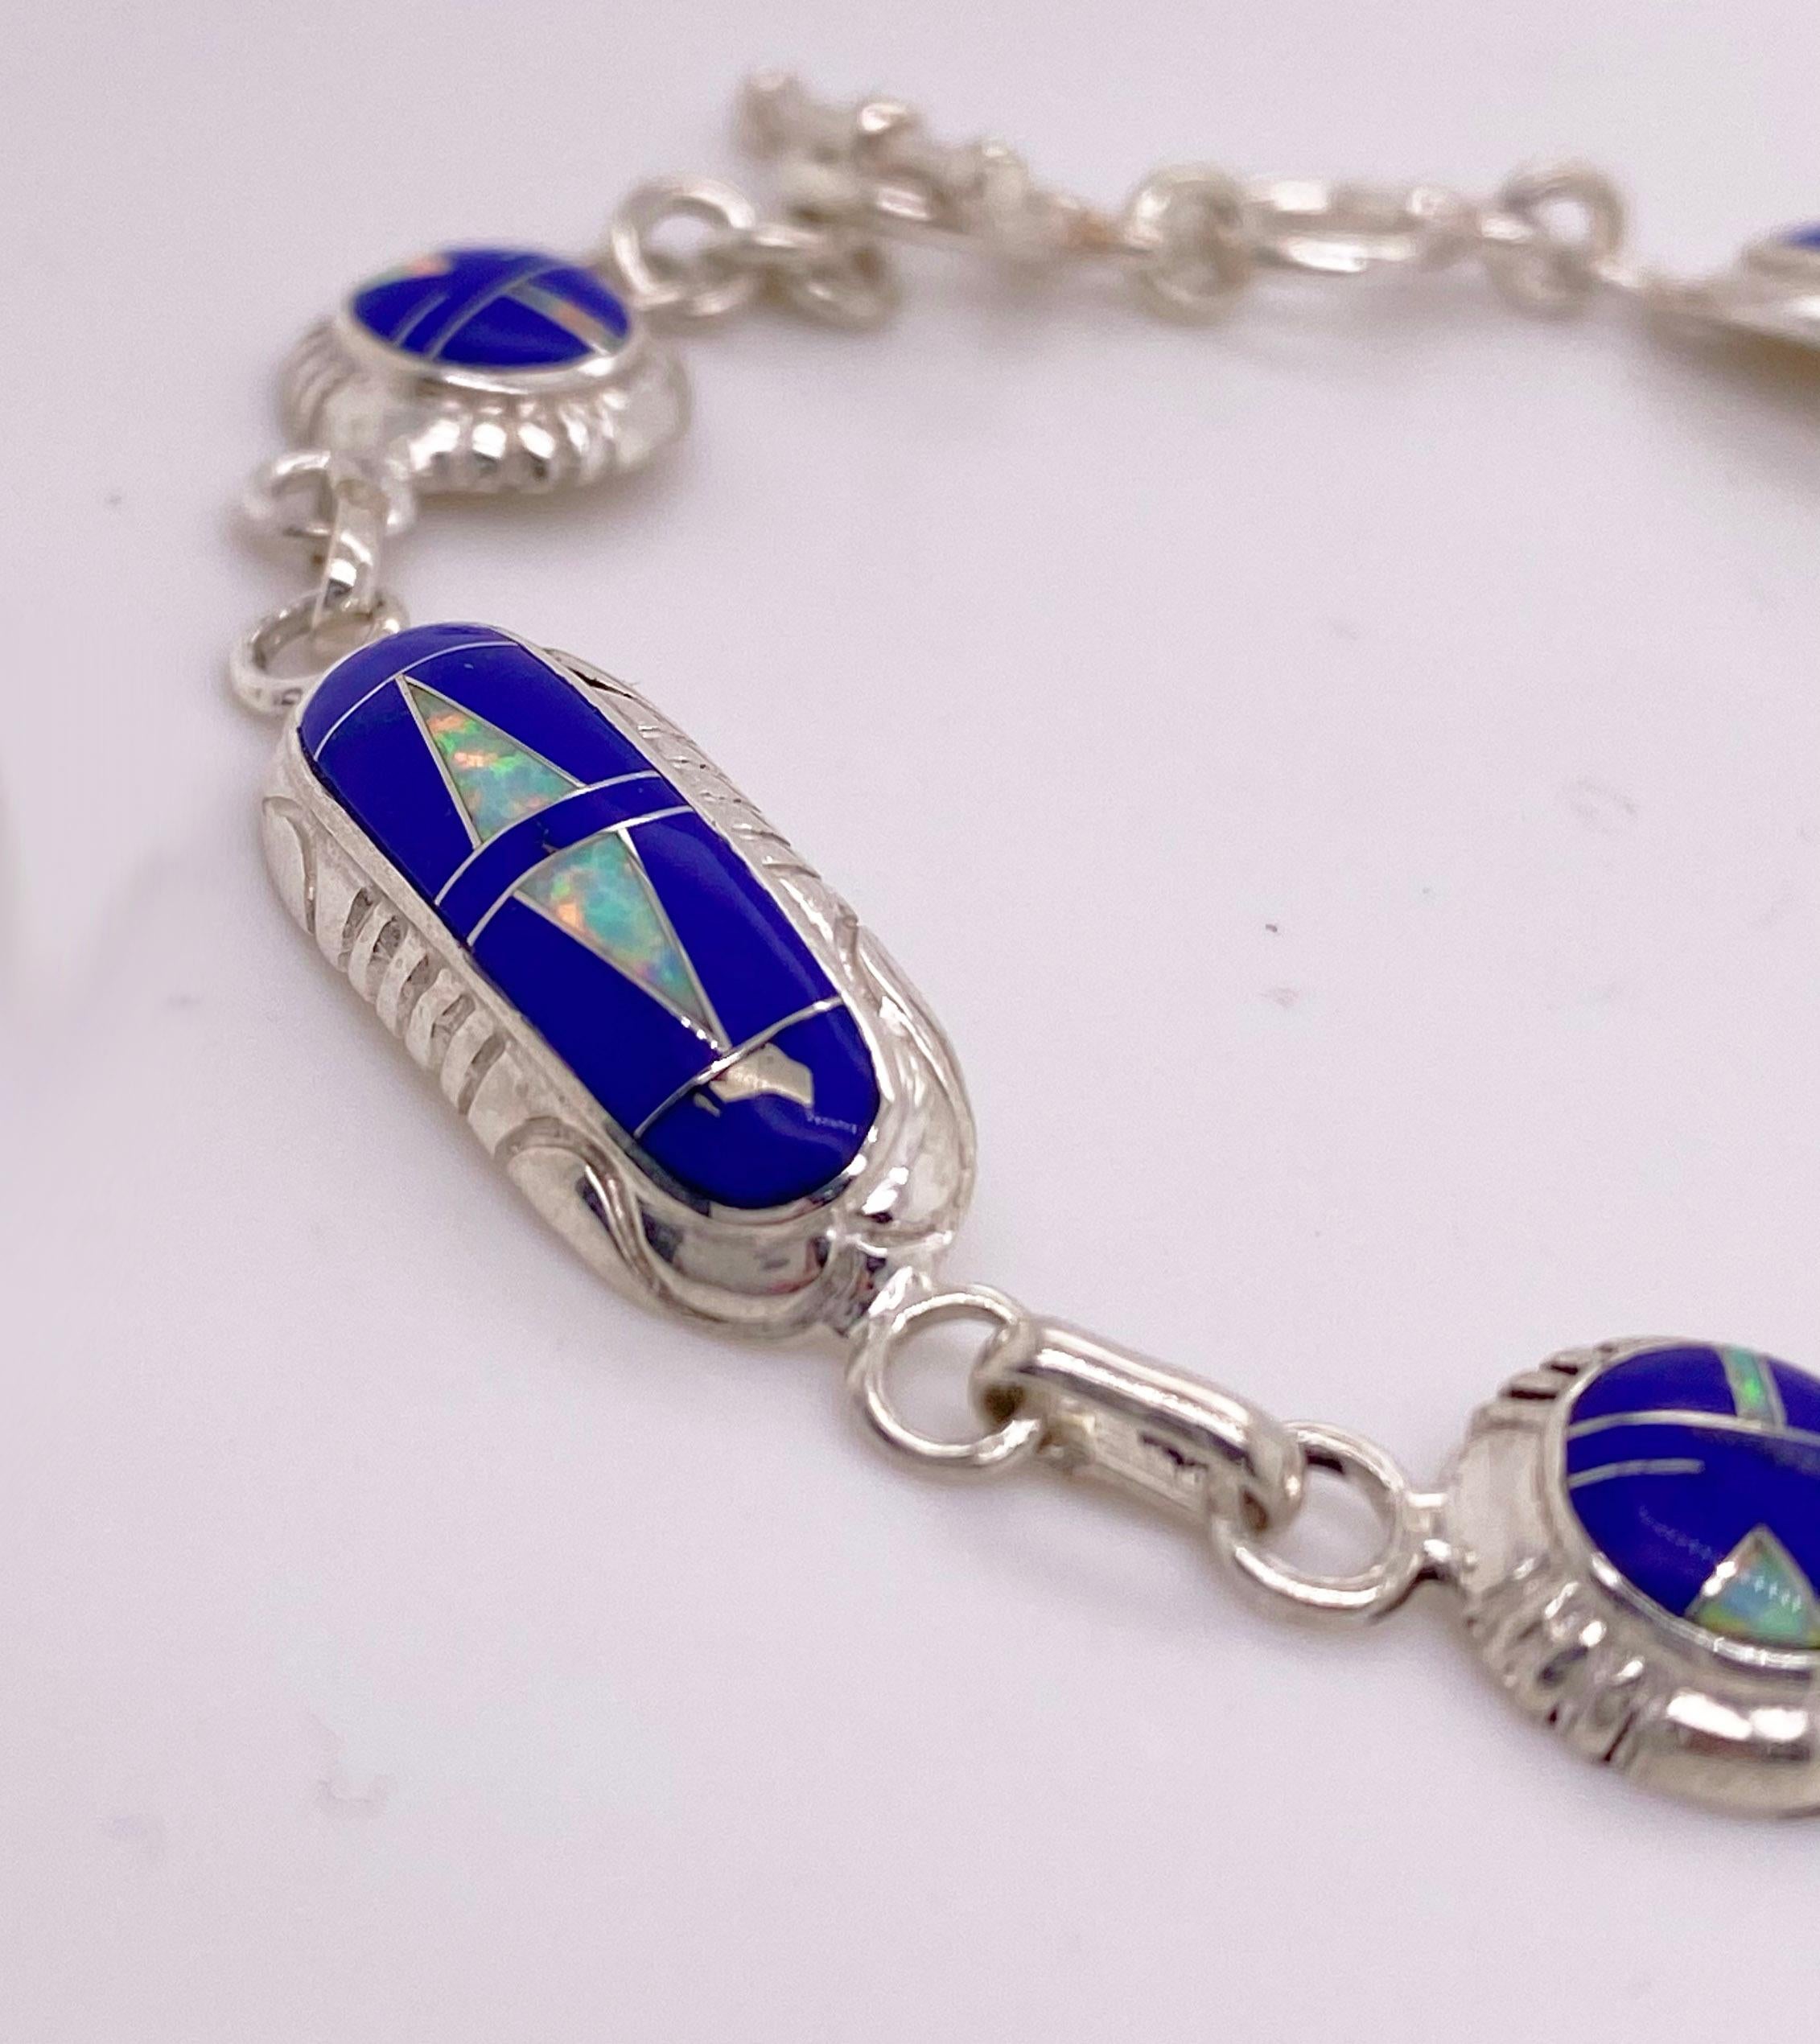 Indian designed and made, this bracelet has loads of personality! The lapis is the highest grade as a rich blue color and the triangle inlay of opal really “pops” off the blue of the lapis. The opal is genuine material and is a lovely pink and light